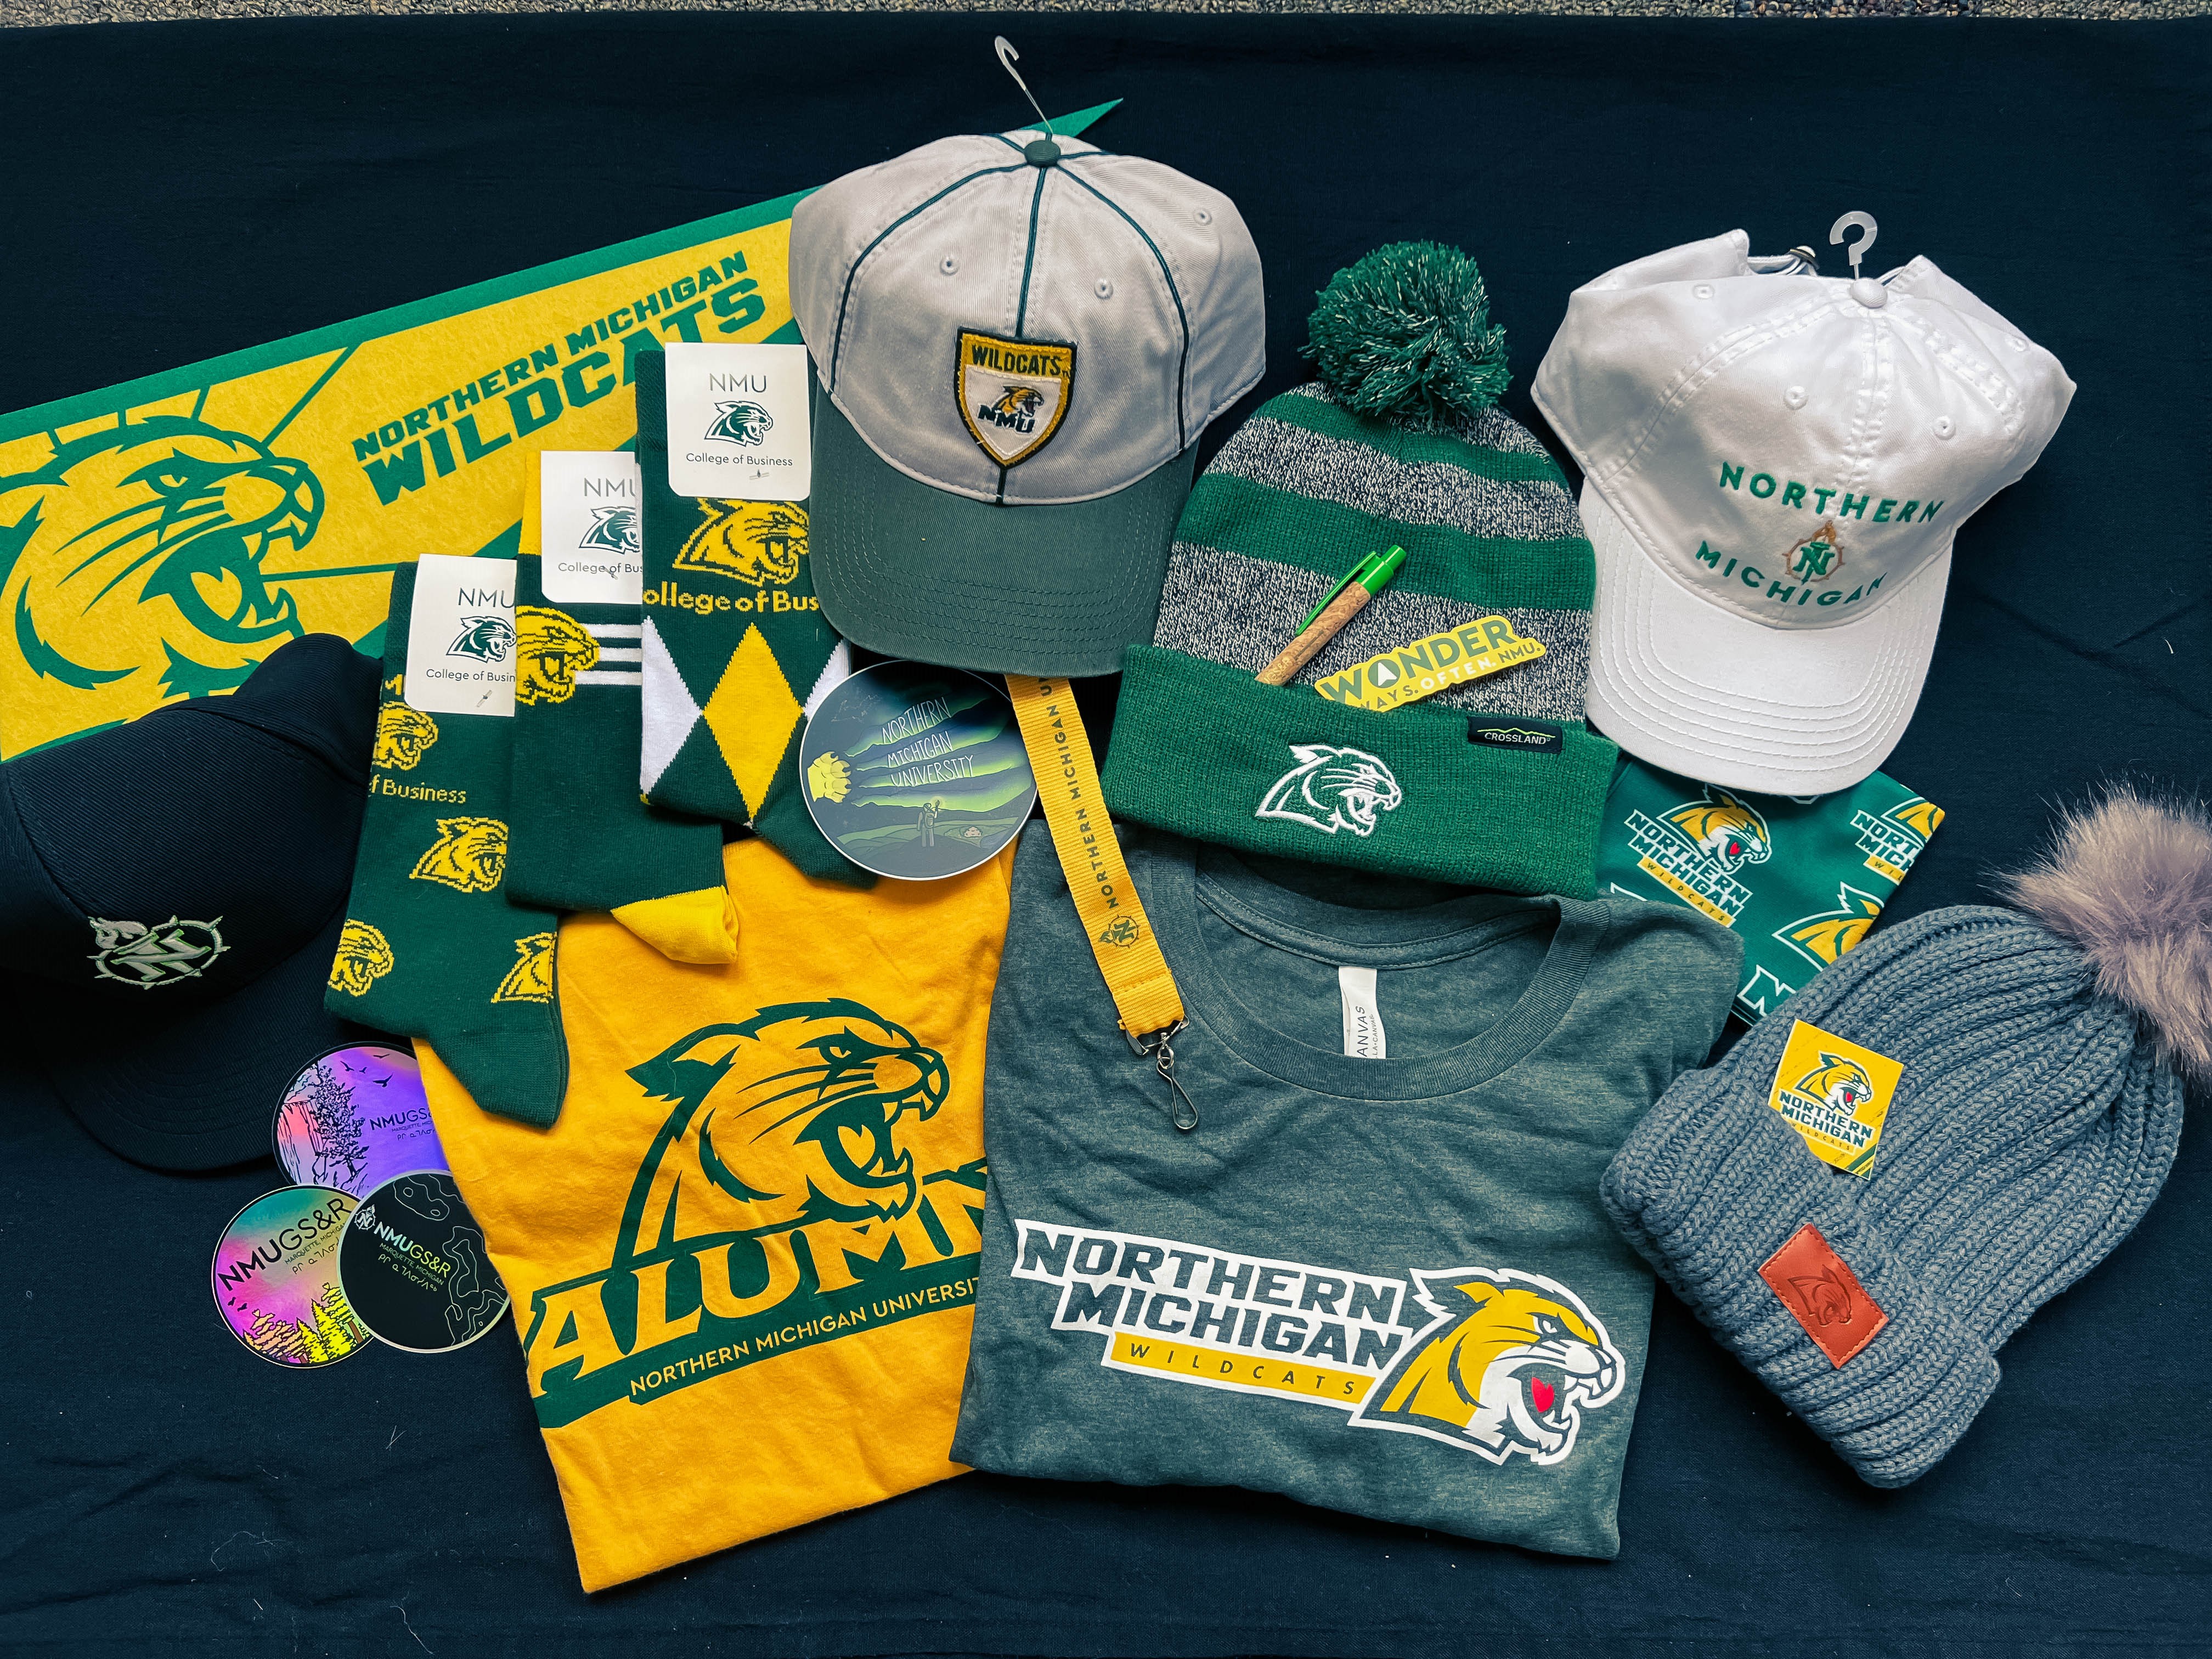 Assortment of possible NMU Swag Bag items